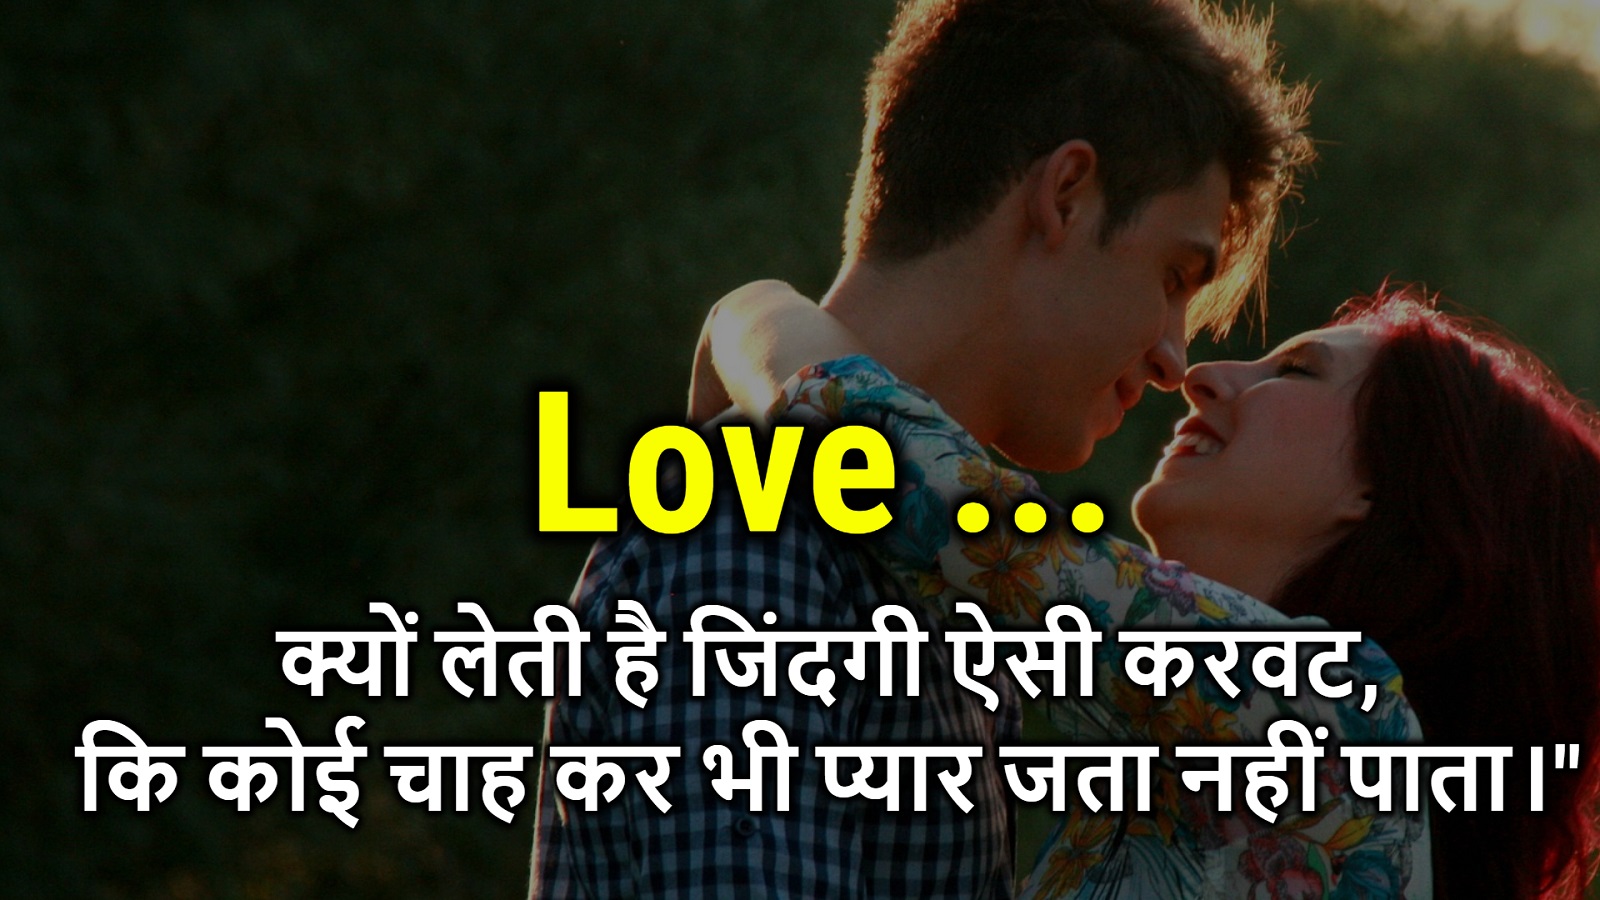 Wallpaper Of Love Quotes In Hindi - Love Quotes With Images Hindi , HD Wallpaper & Backgrounds